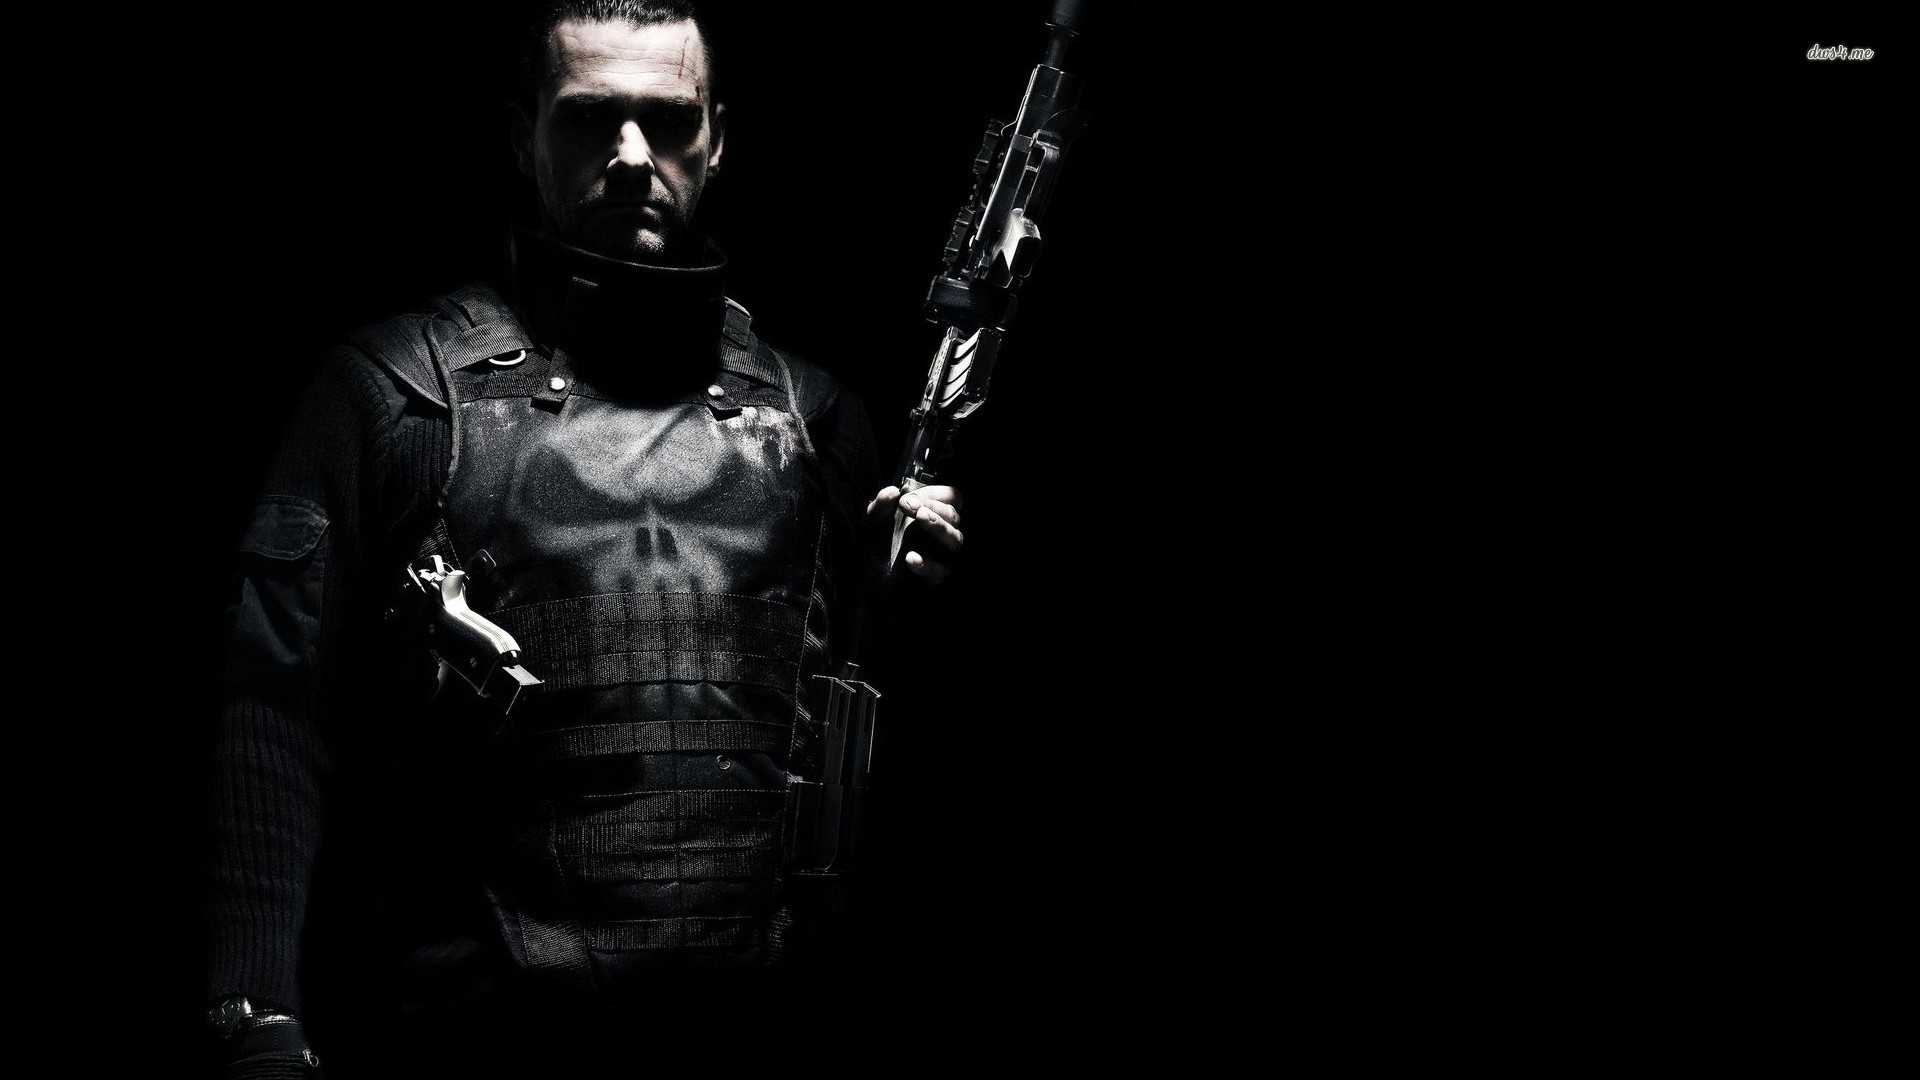 Punisher Wallpaper PC Attachment 16390   HD Wallpapers Site 1920x1080